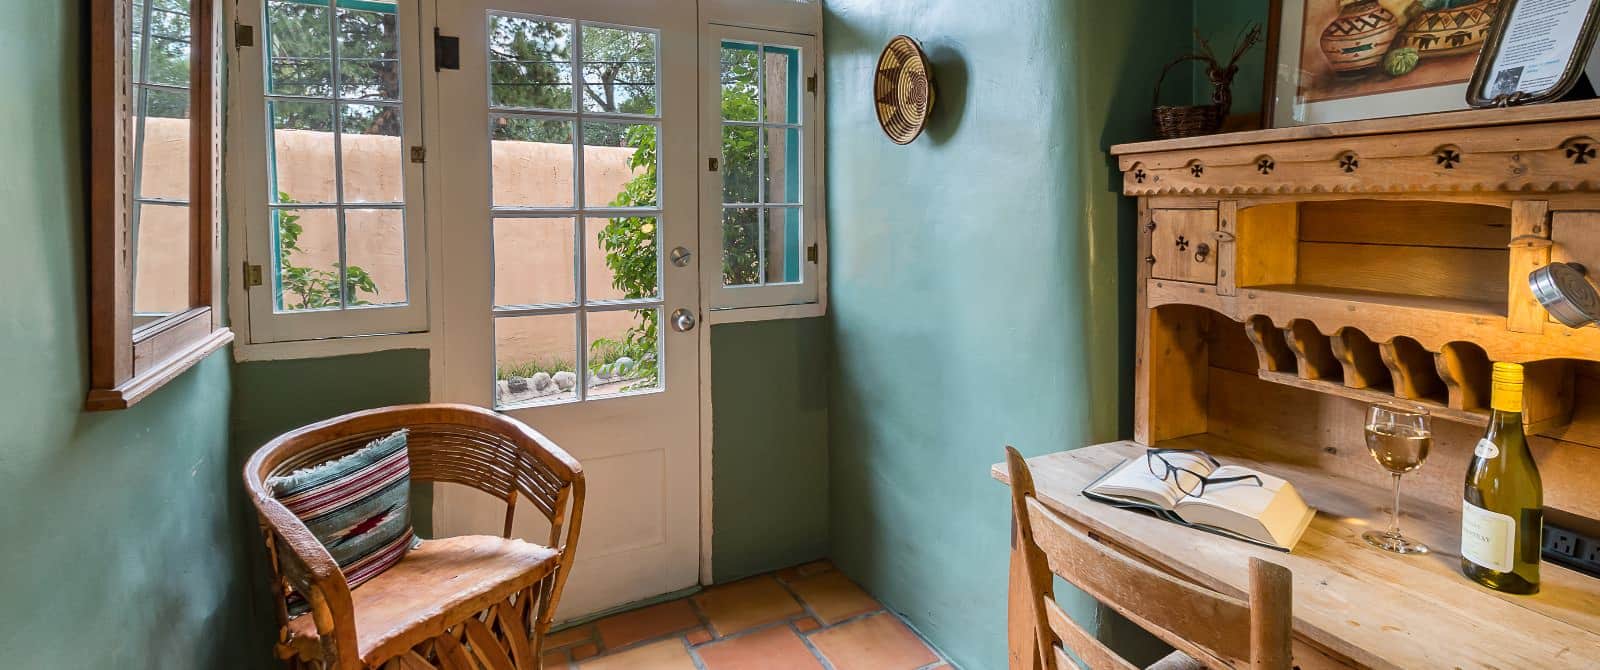 Cool turquoise walls frame a wooden door next to a chair and desk with a book and wine bottle.